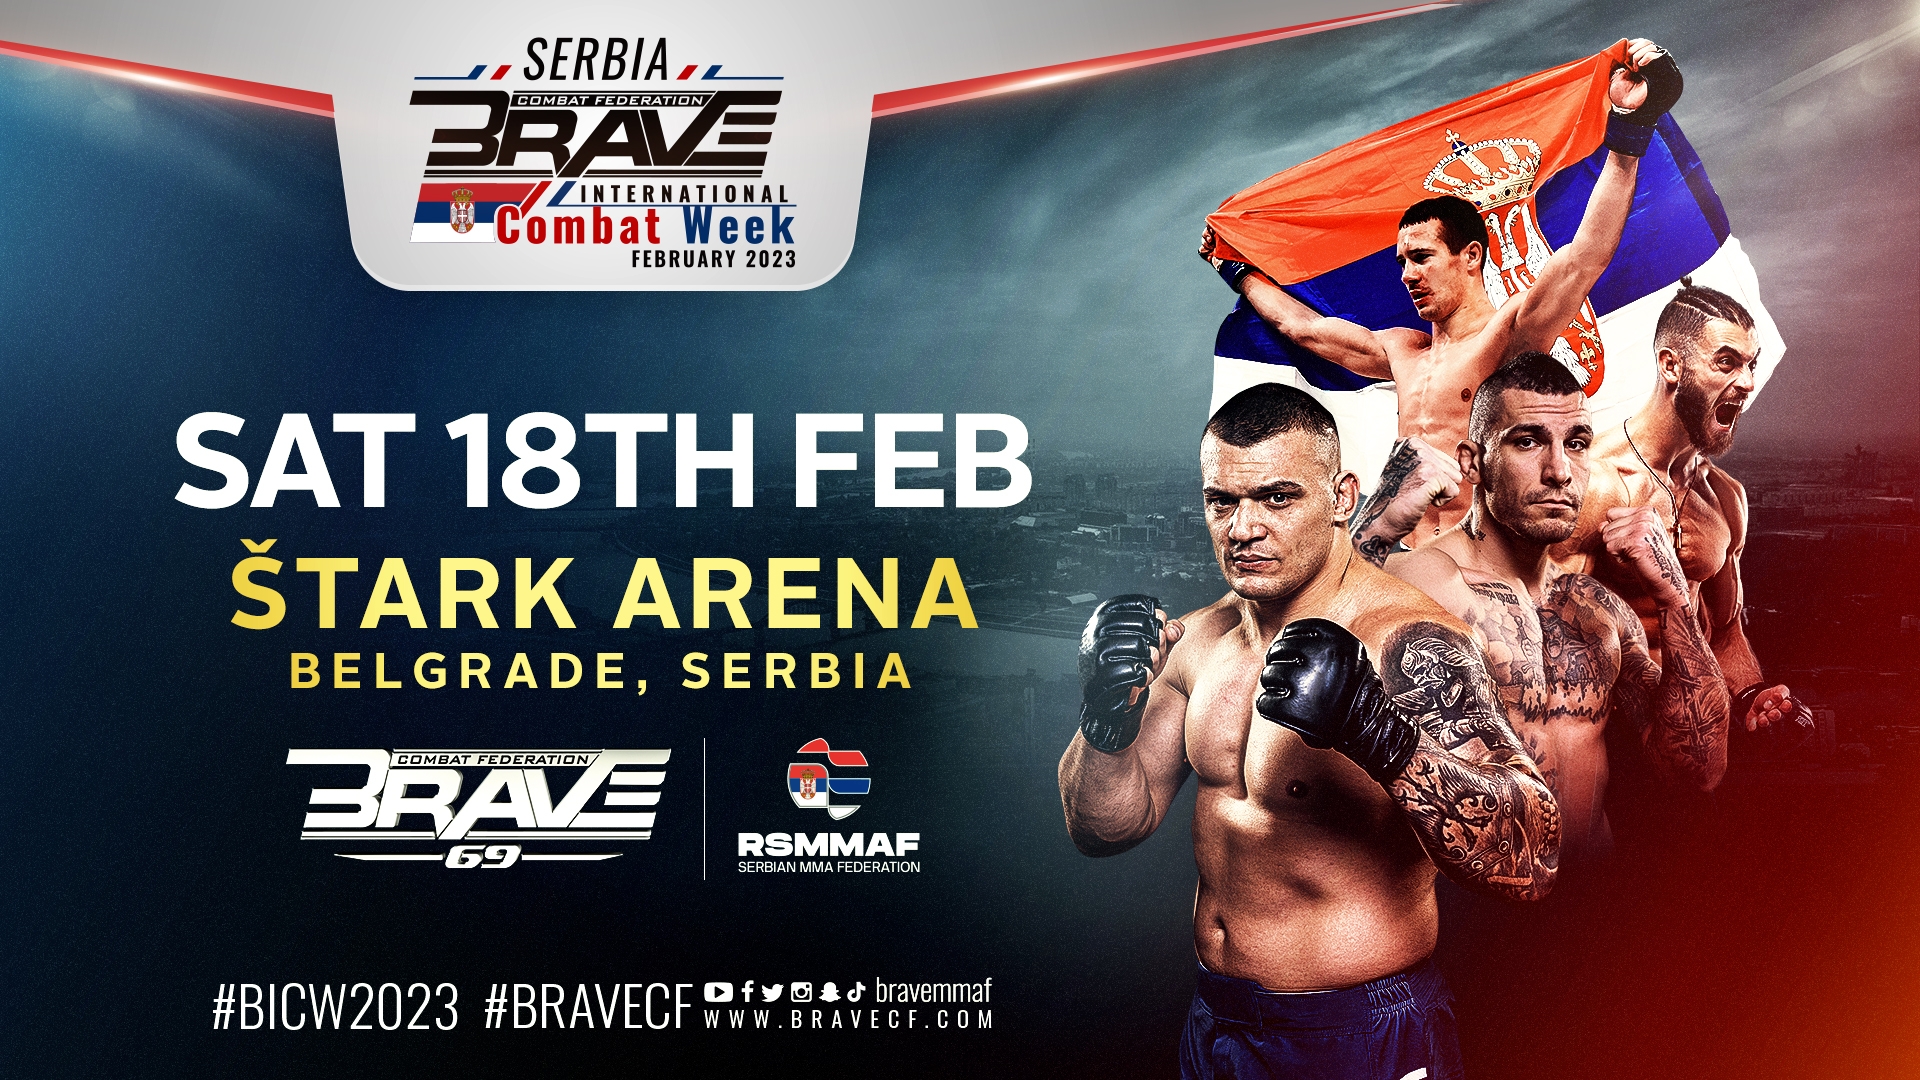 2022 IMMAF World Championships and BRAVE CF 69 at Stark Arena